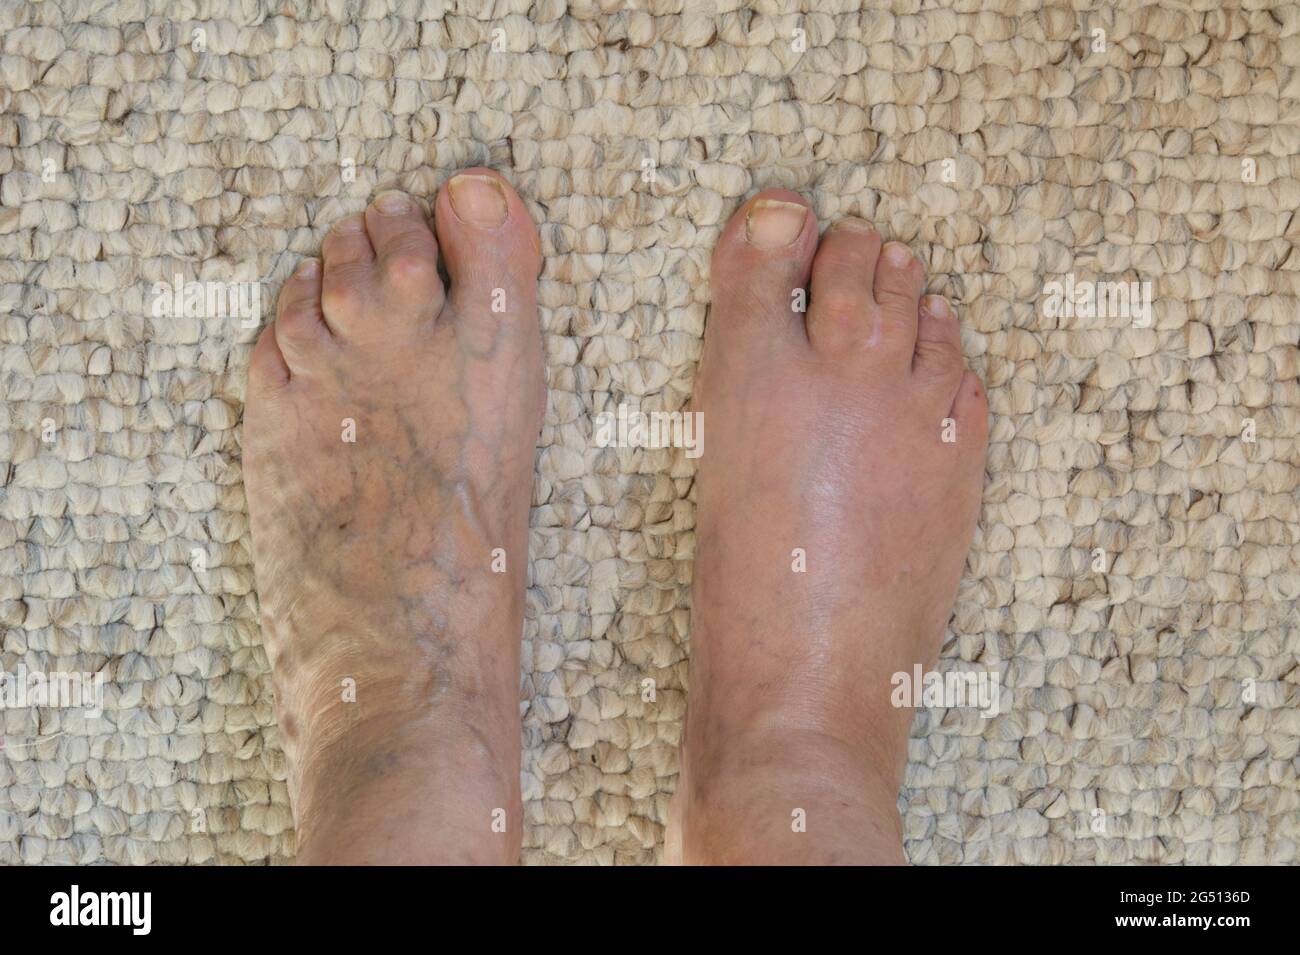 Woman's feet displaying webbed toes, varicose veins and in one foot, cellulitis Stock Photo